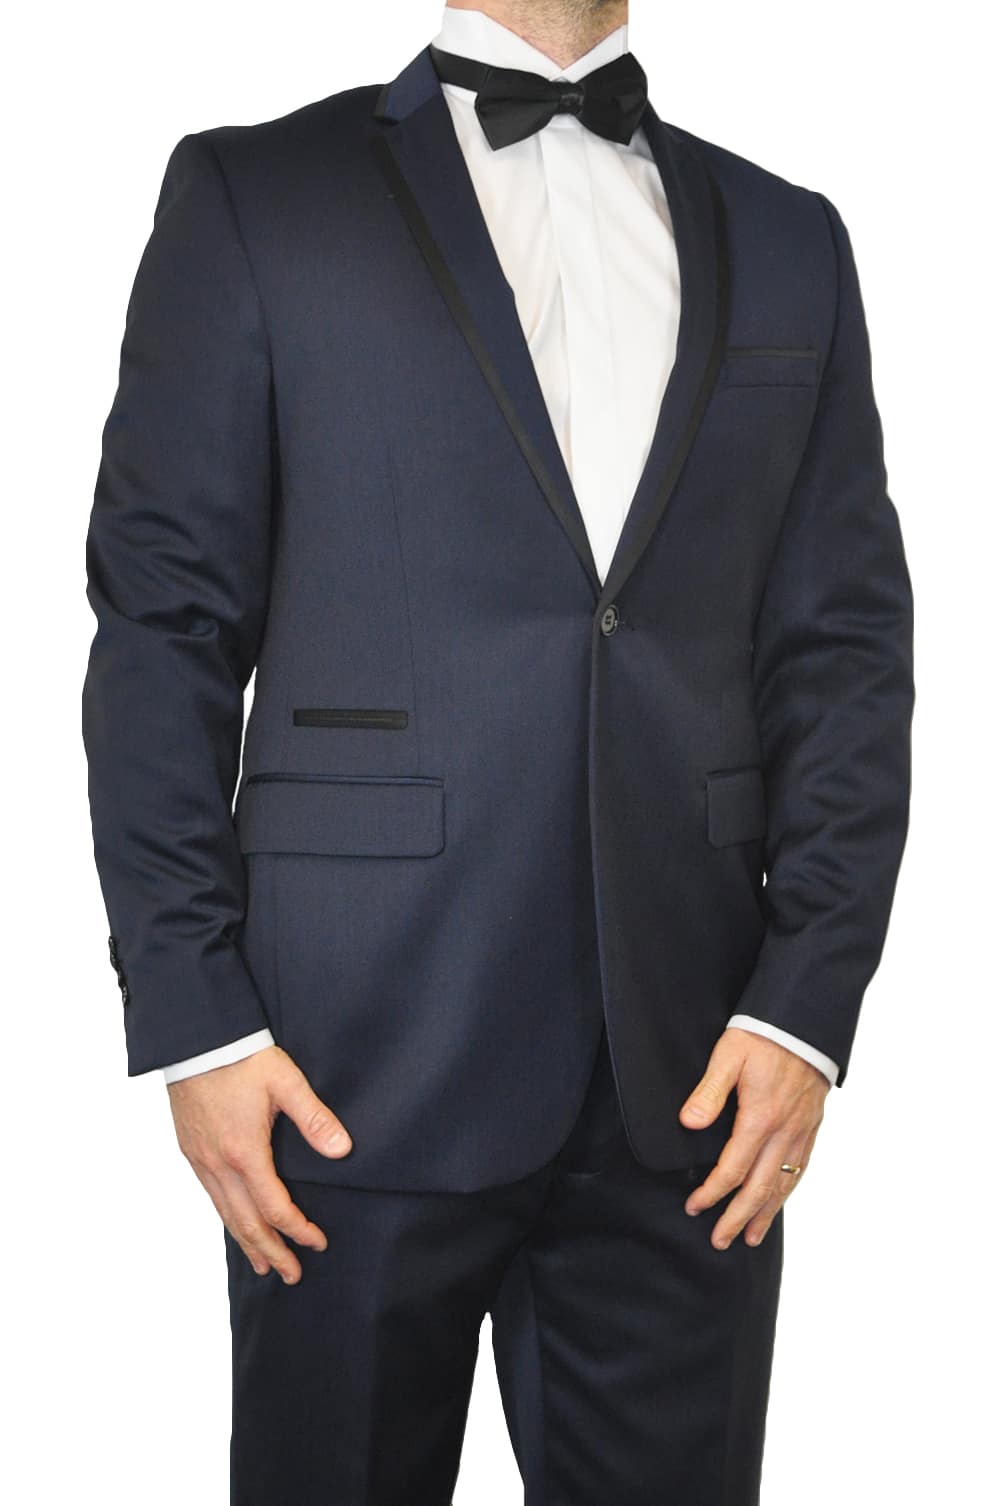 Suit Up the Bond Way at Formal Tailor - tuxedo - suit (1)